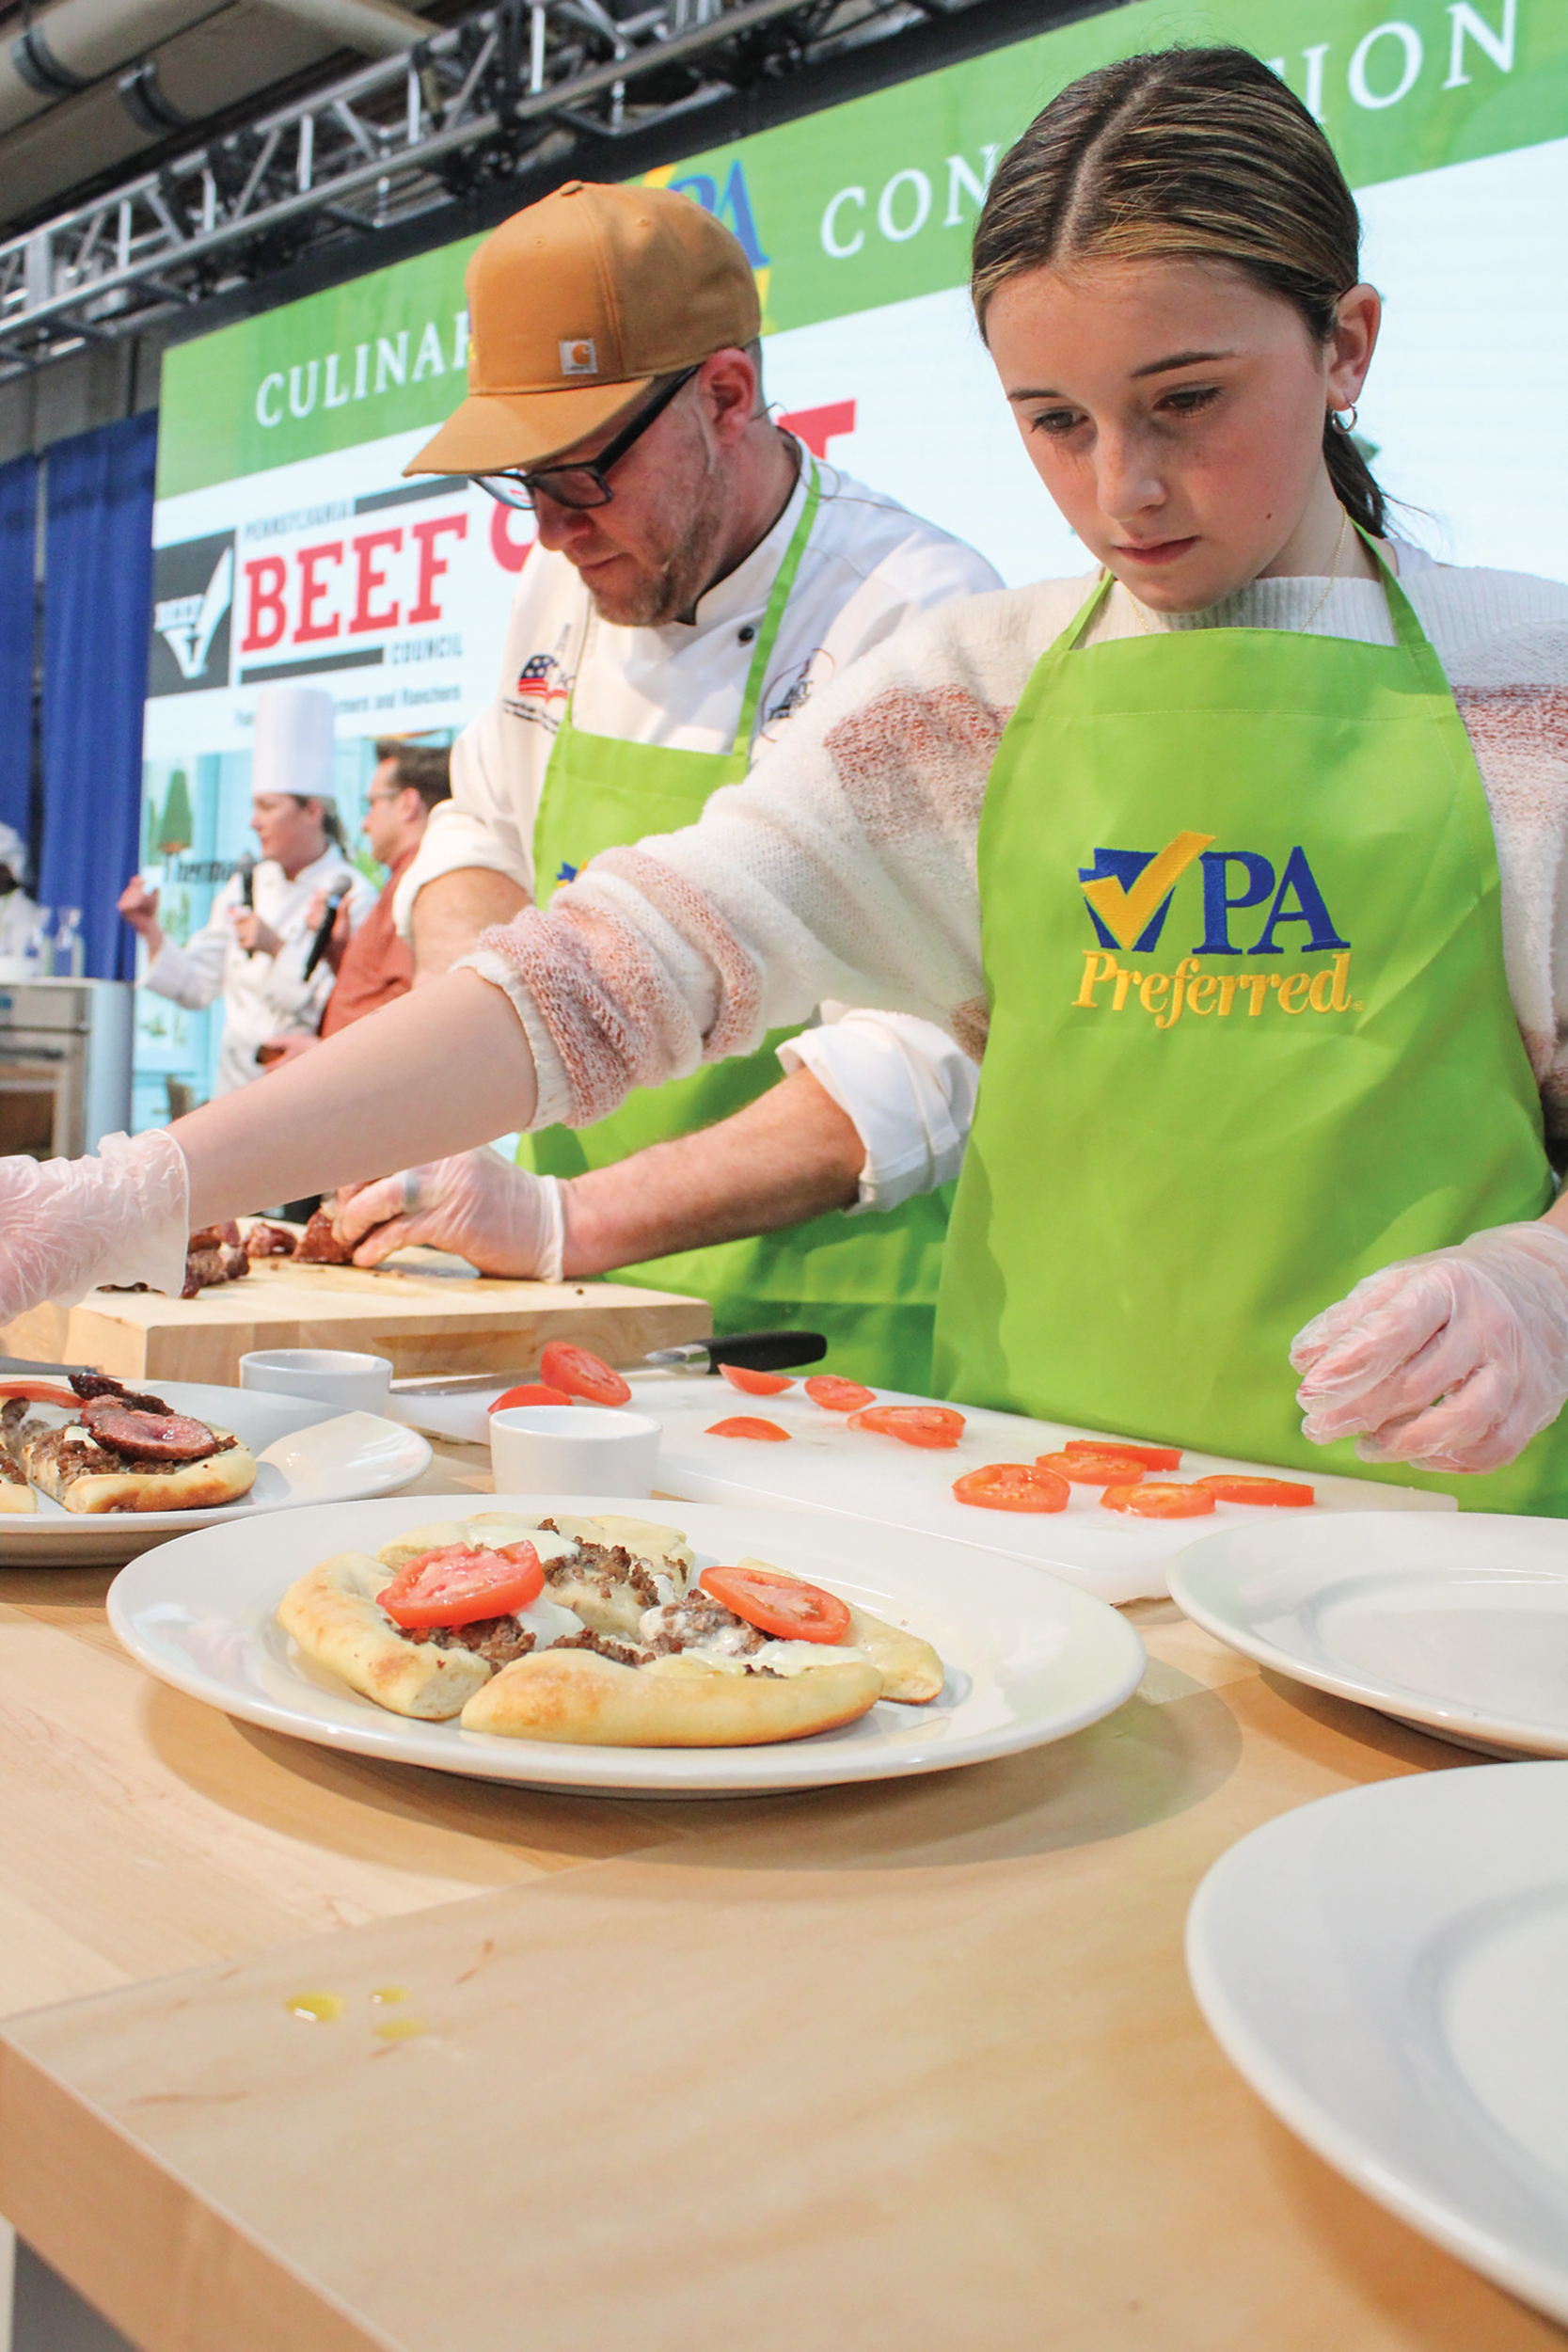 Landry Hockenberry, right, prepares food during The Beef Showdown: Kids Edition at the Pennsylvania Farm Show.